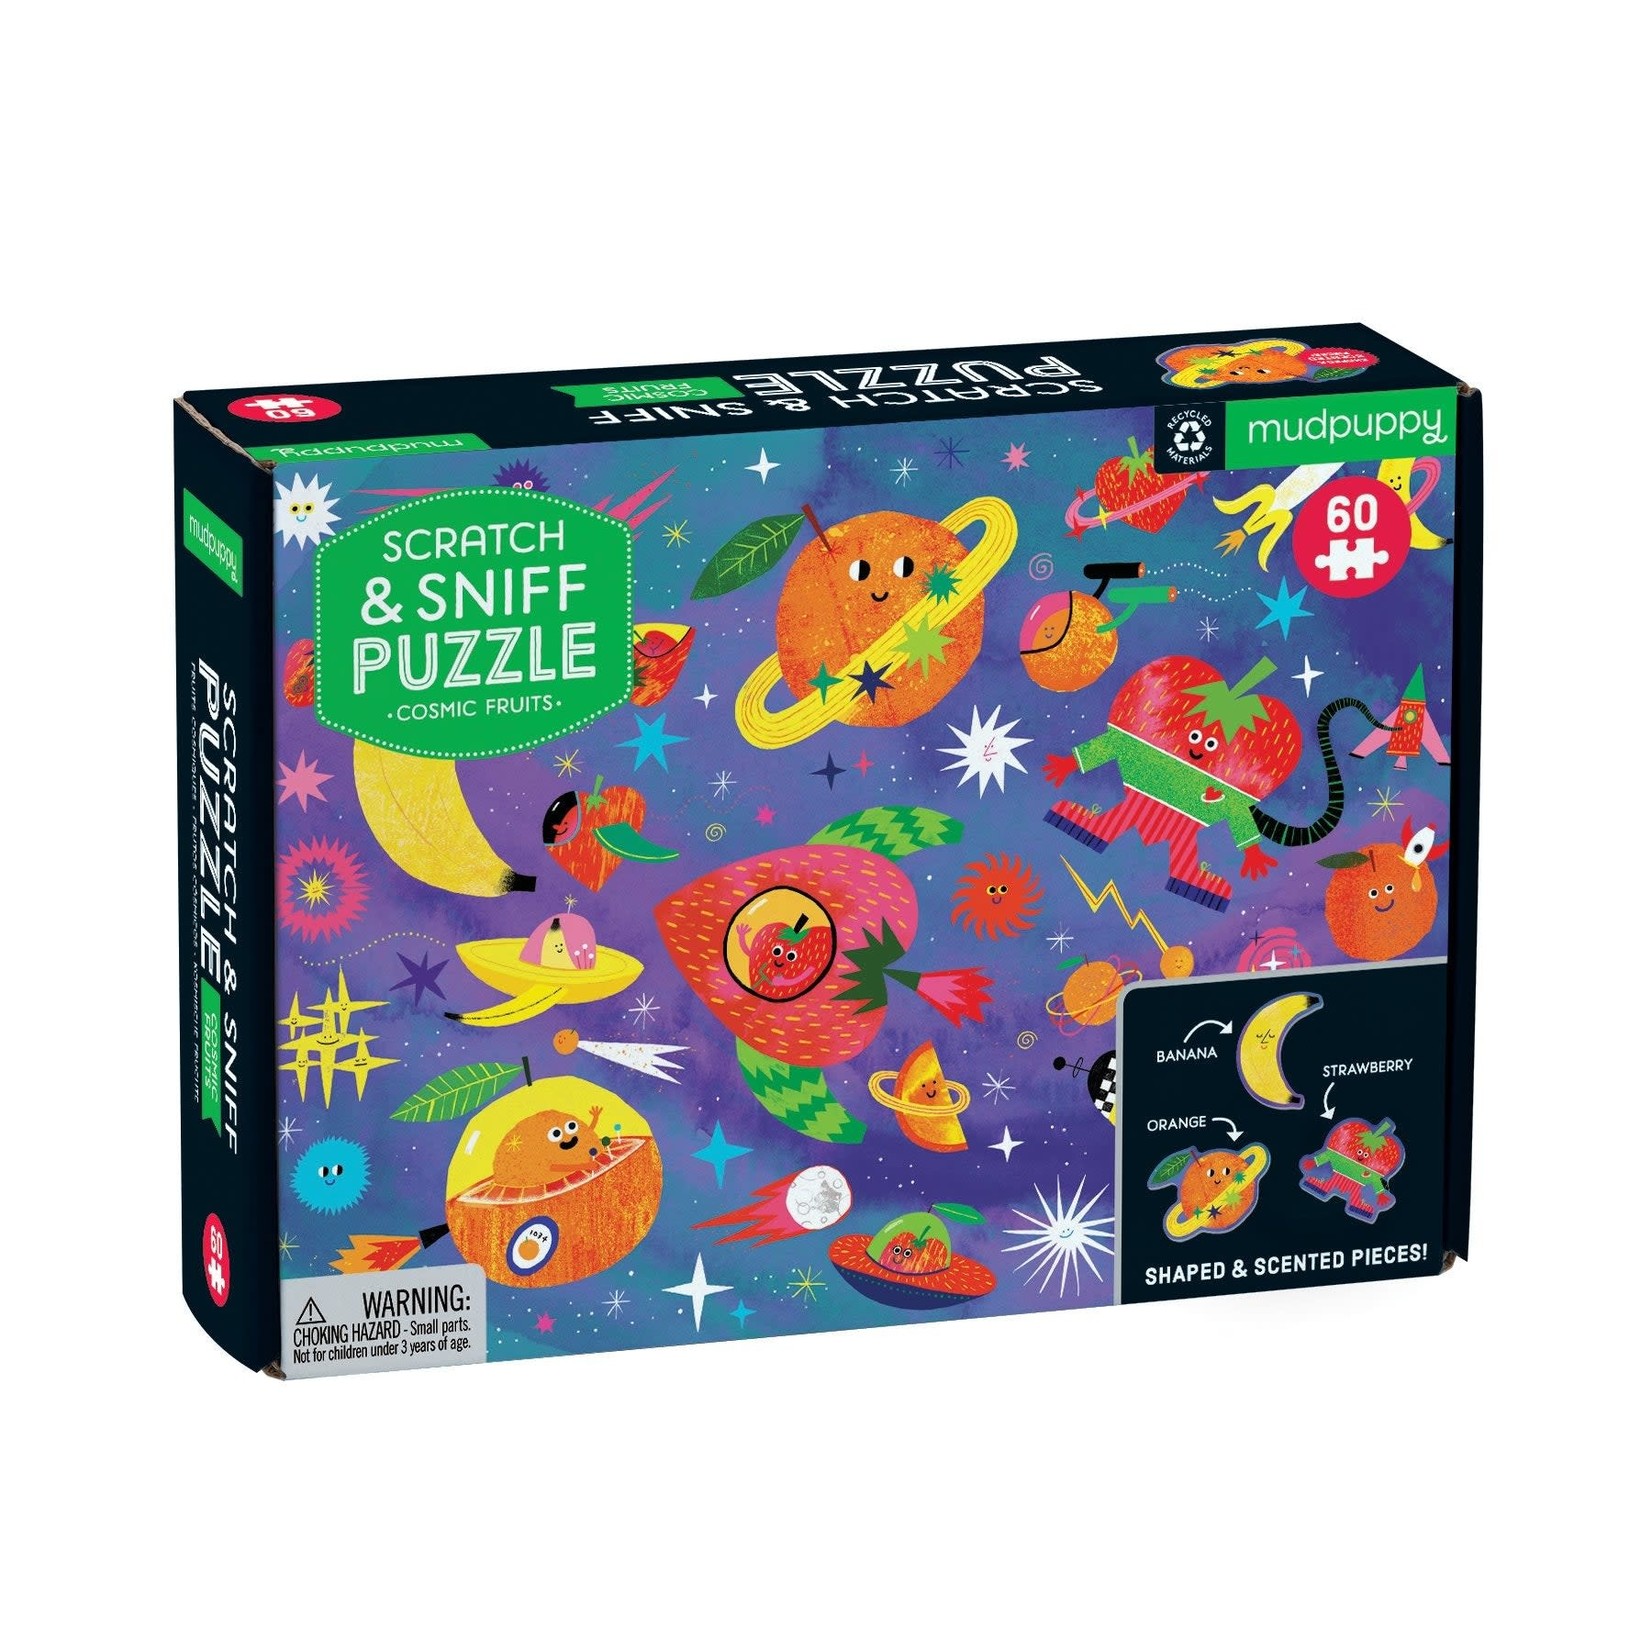 Mudpuppy Scratch and Sniff - Cosmic Fruits 60 Piece Puzzle